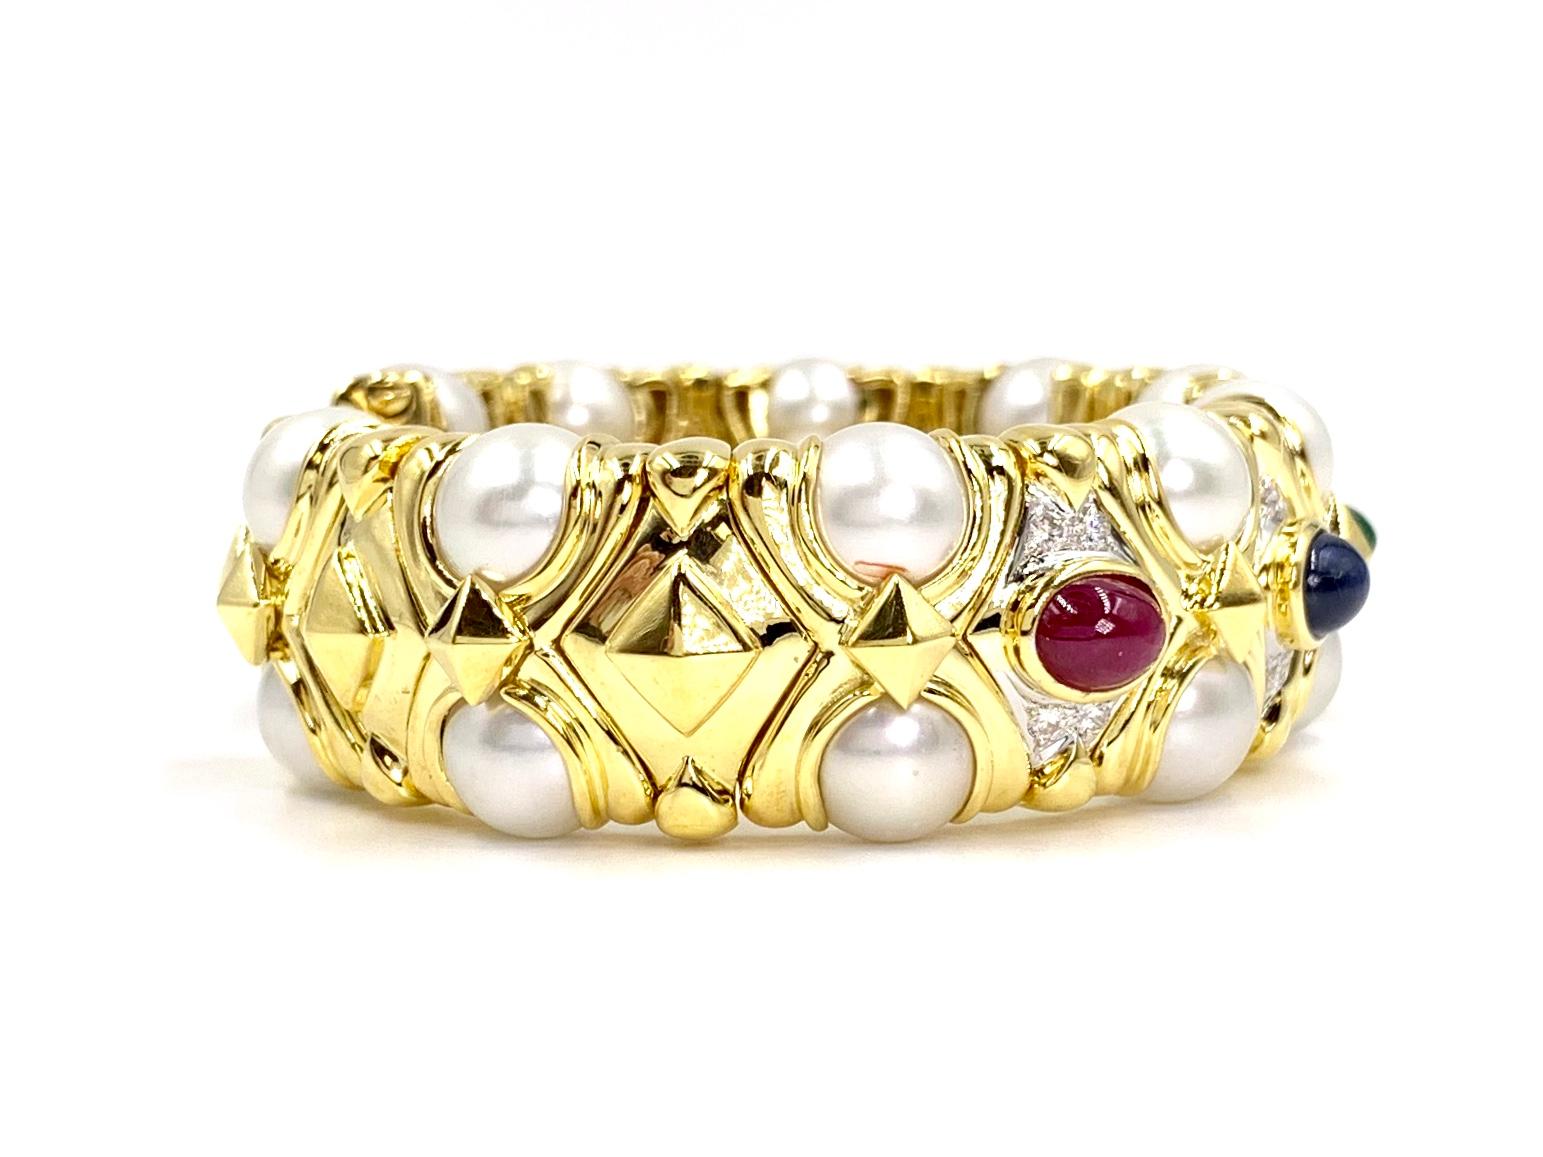 18 Karat Precious Gemstone, Diamond and Cultured Pearl Cuff Bracelet In Excellent Condition For Sale In Pikesville, MD